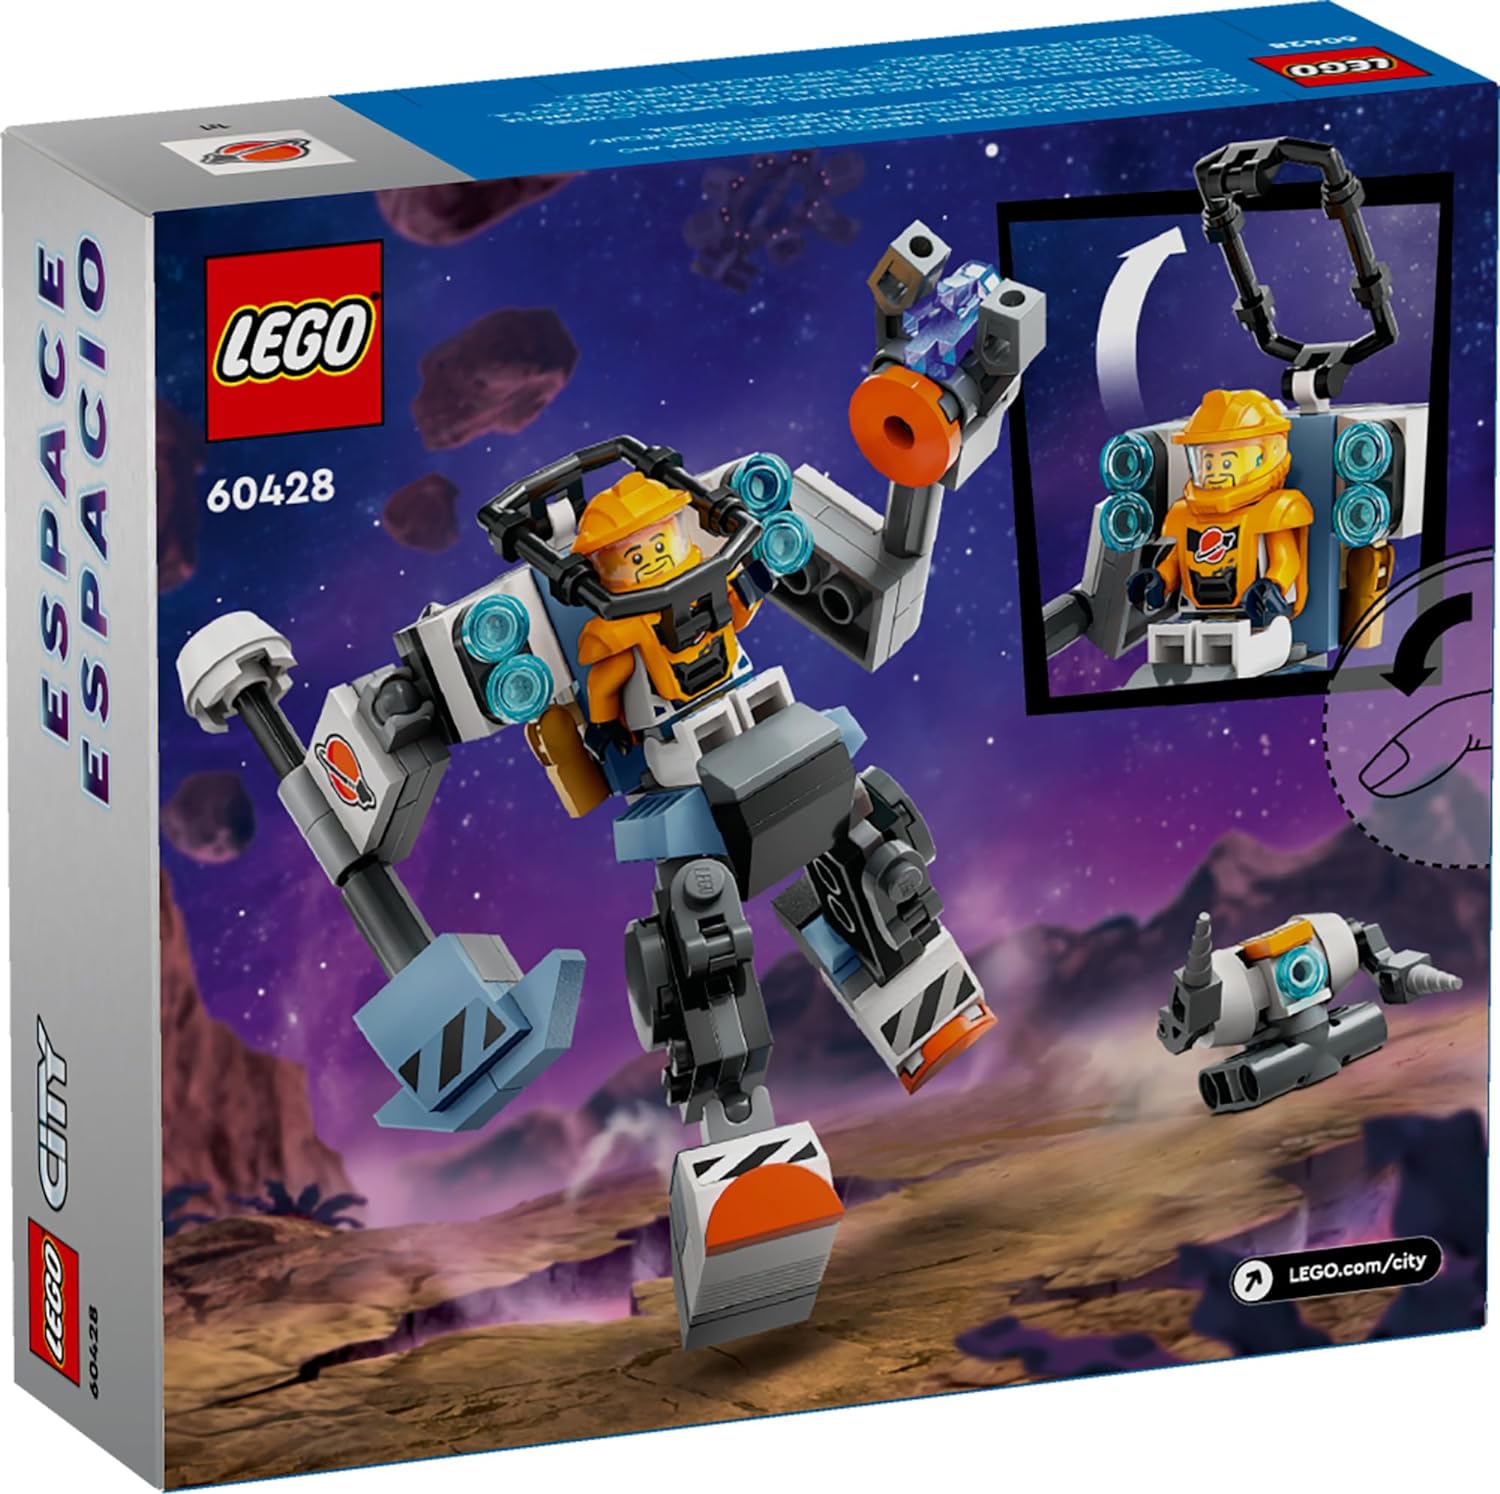 LEGO 60428 City Space Construction Mech Suit Building Set, Fun Space Toy for Kids Ages 6 and Up, Space Gift Idea for Boys and Girls Who Love Imaginative Play, Includes Pilot Minifigure and Robot Toy.